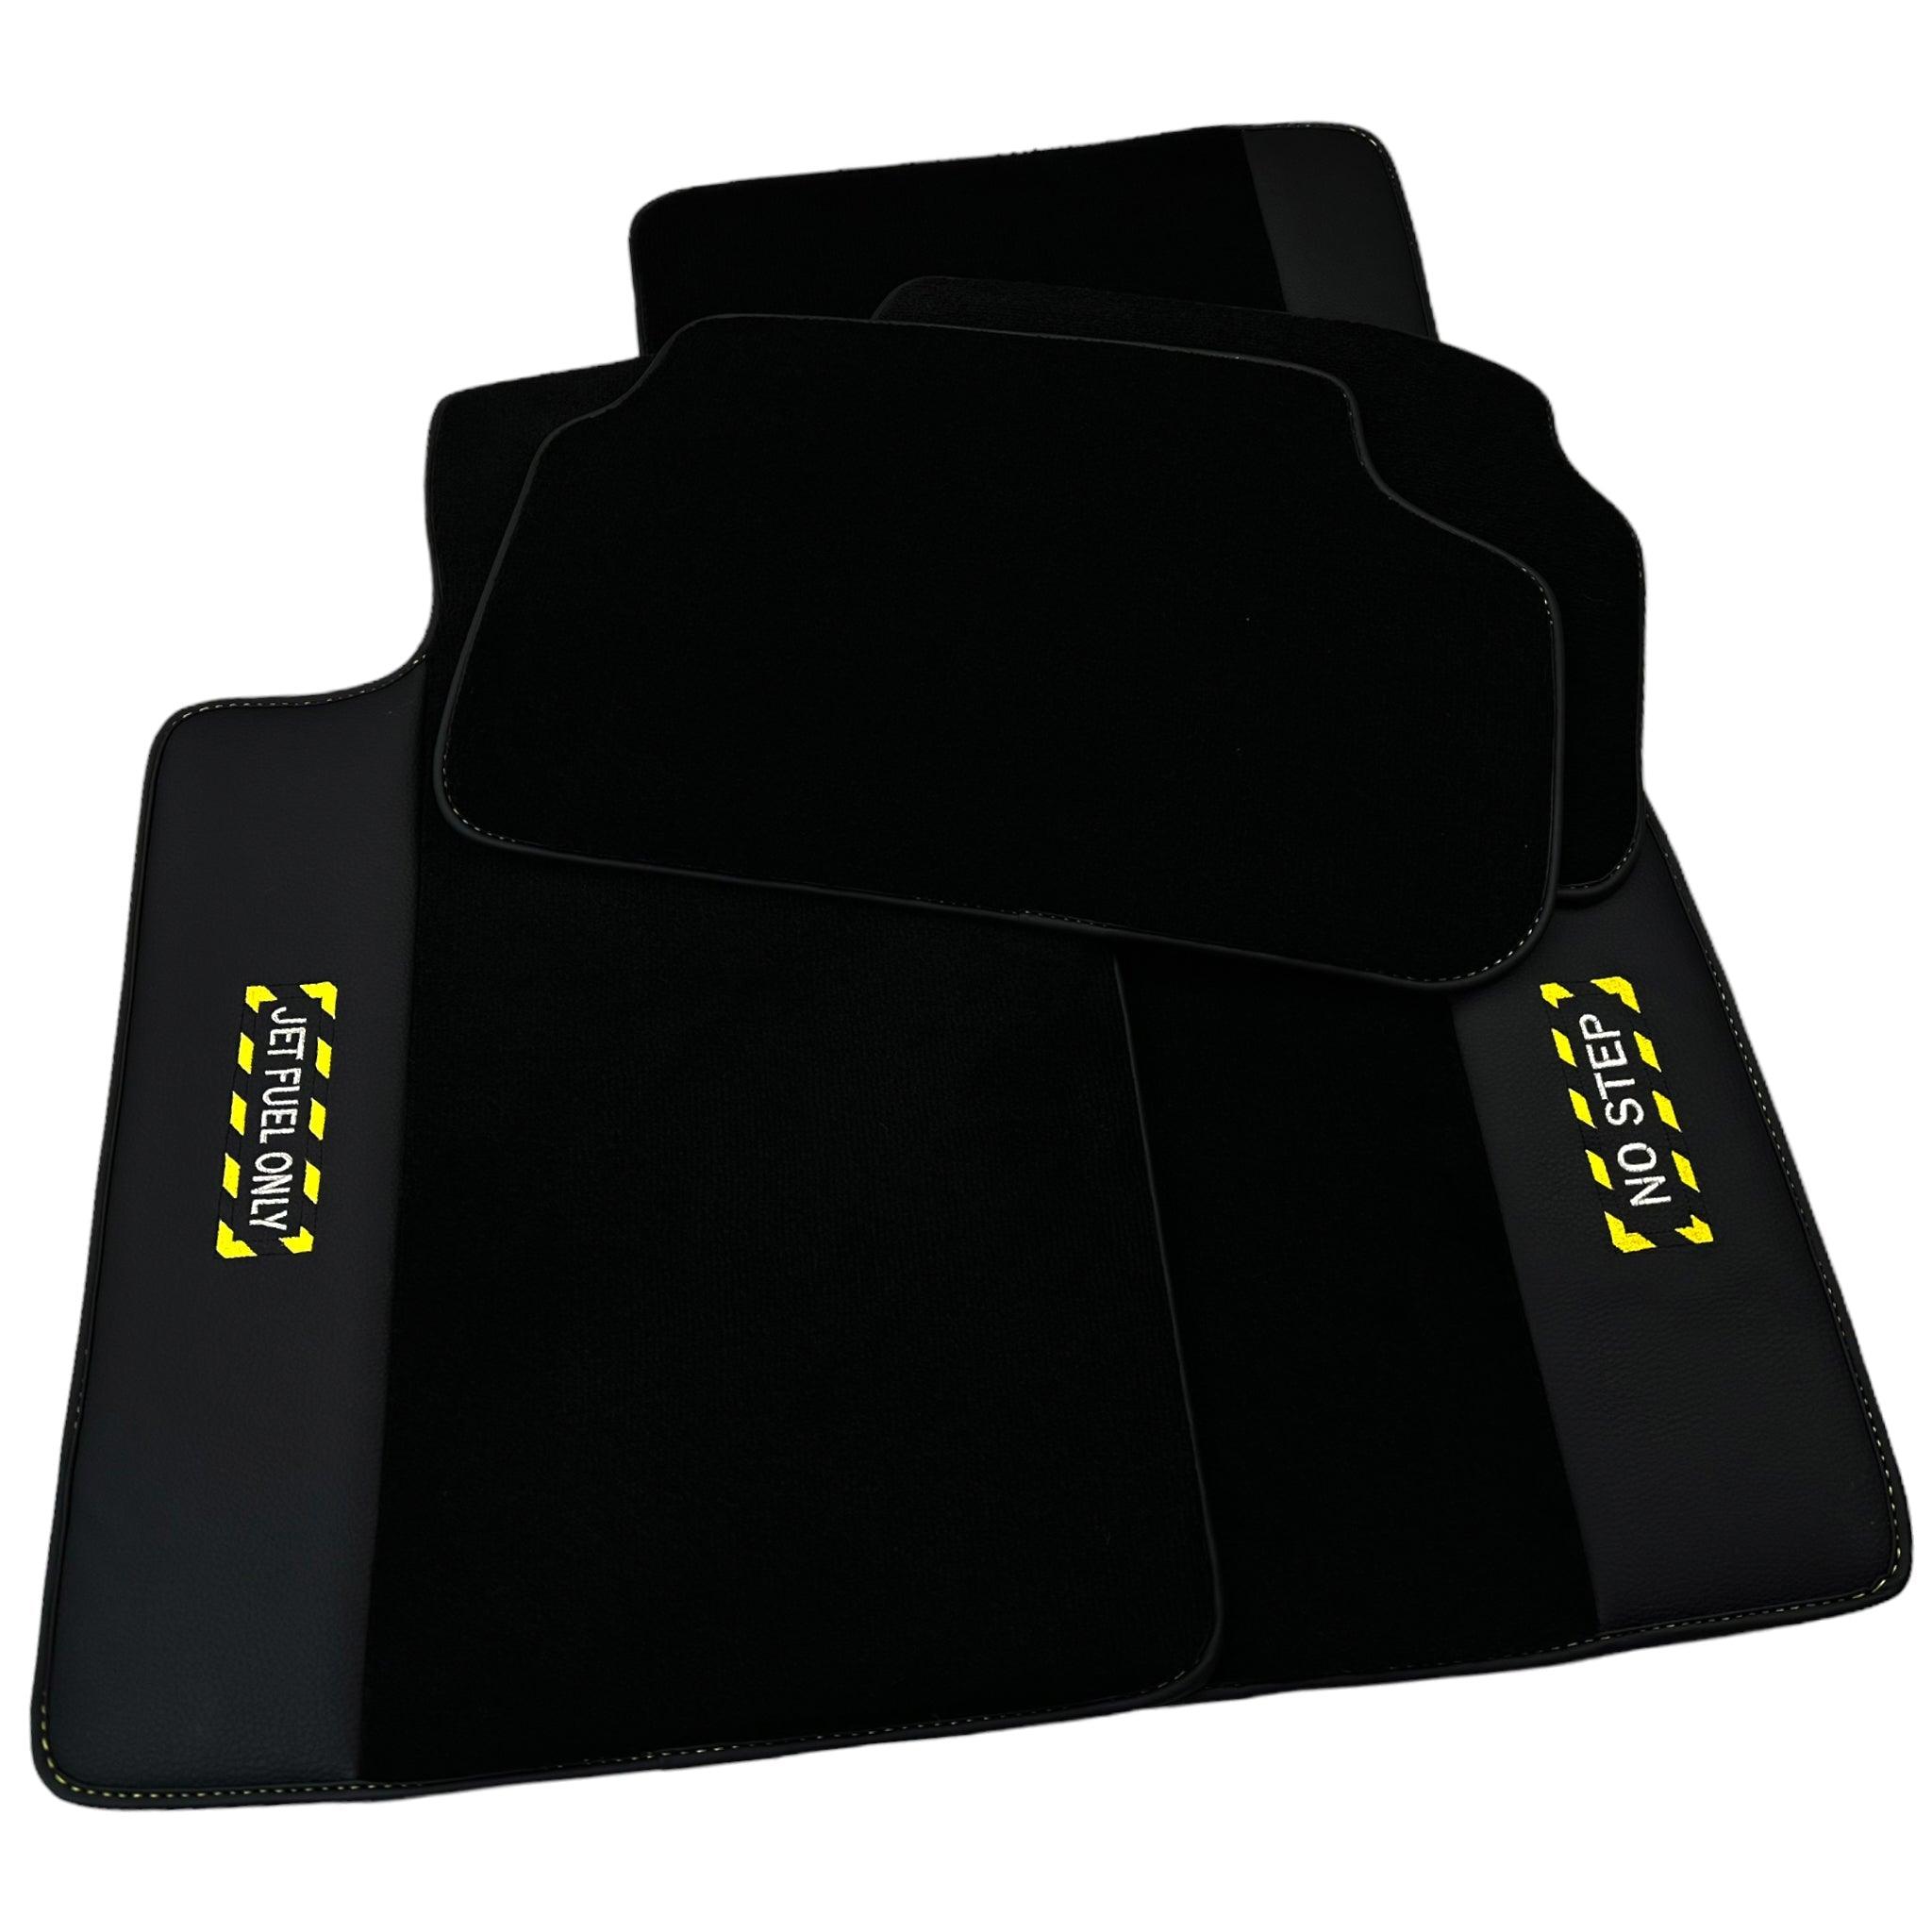 Black Floor Mats For BMW X5M E70 SUV | Fighter Jet Edition - AutoWin